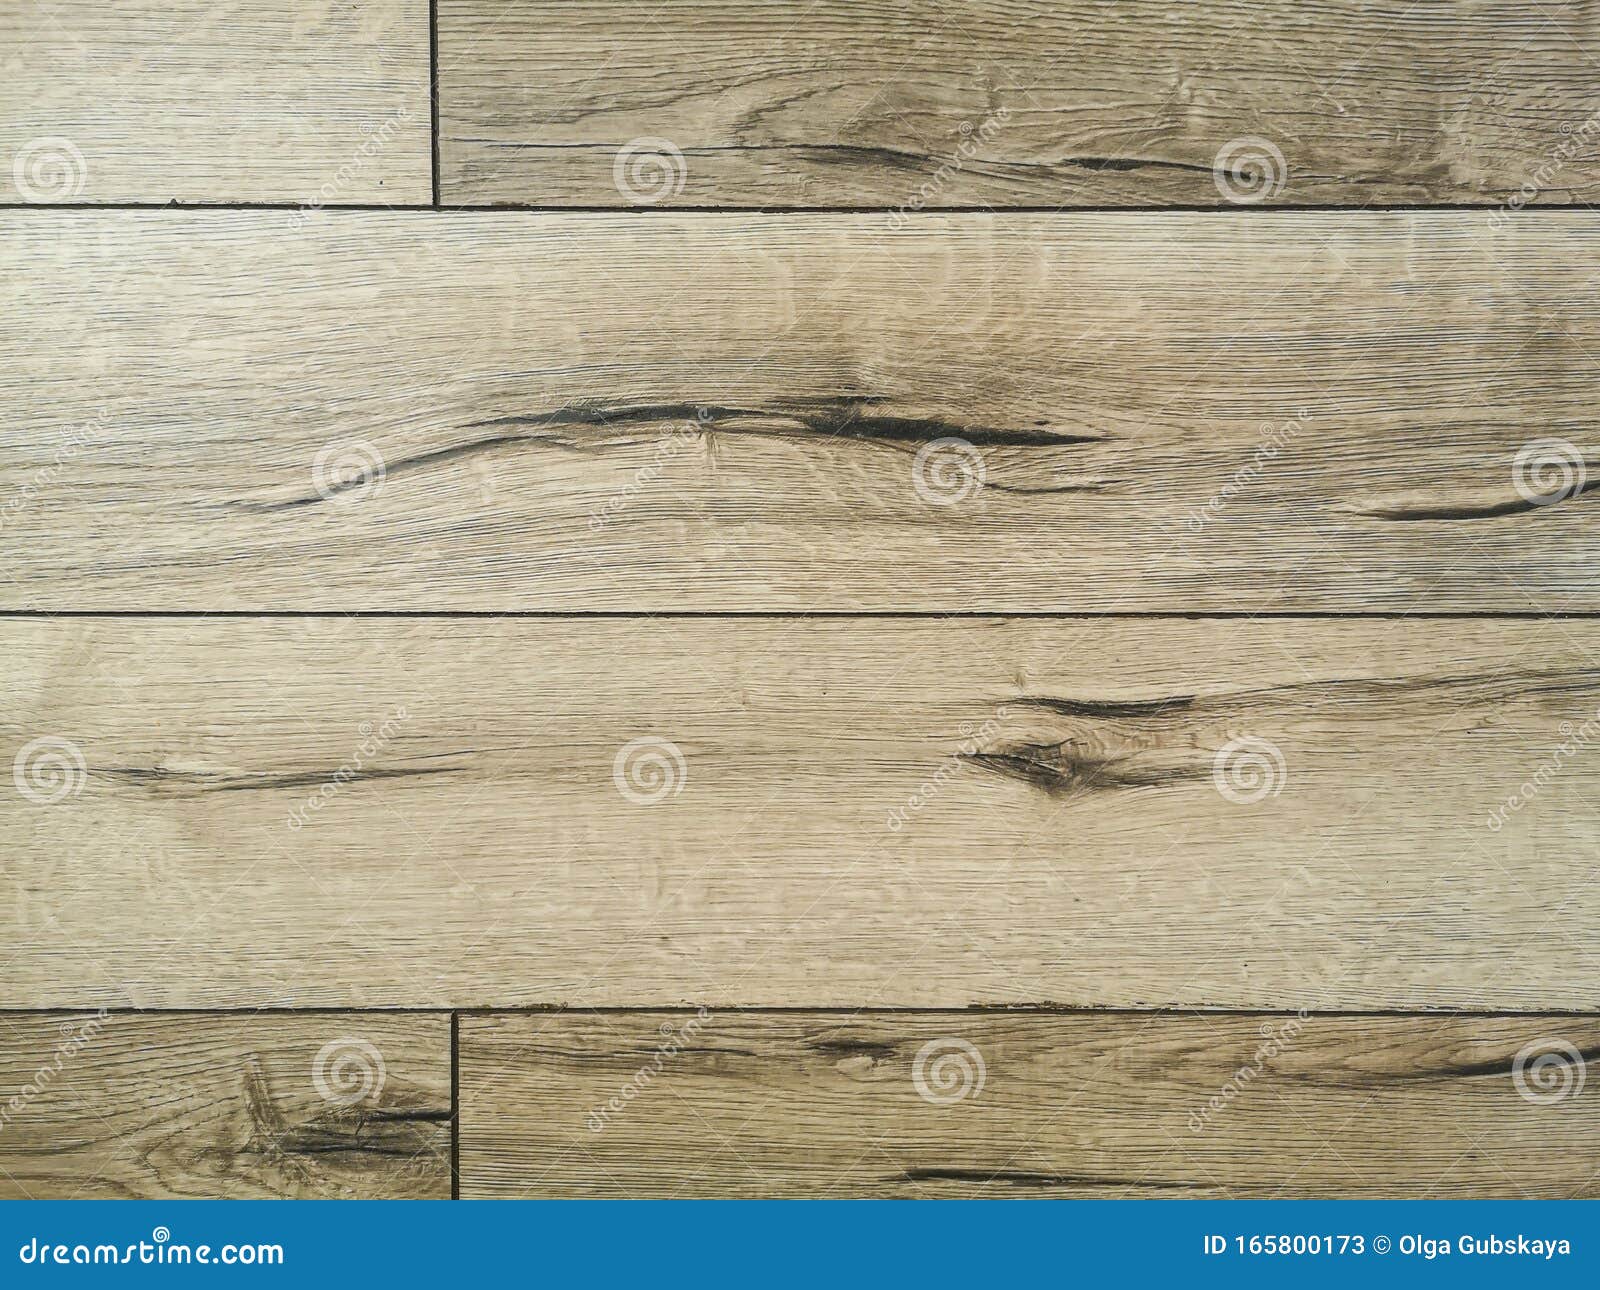 new beautiful laminate floor, decorated with oak wood. background